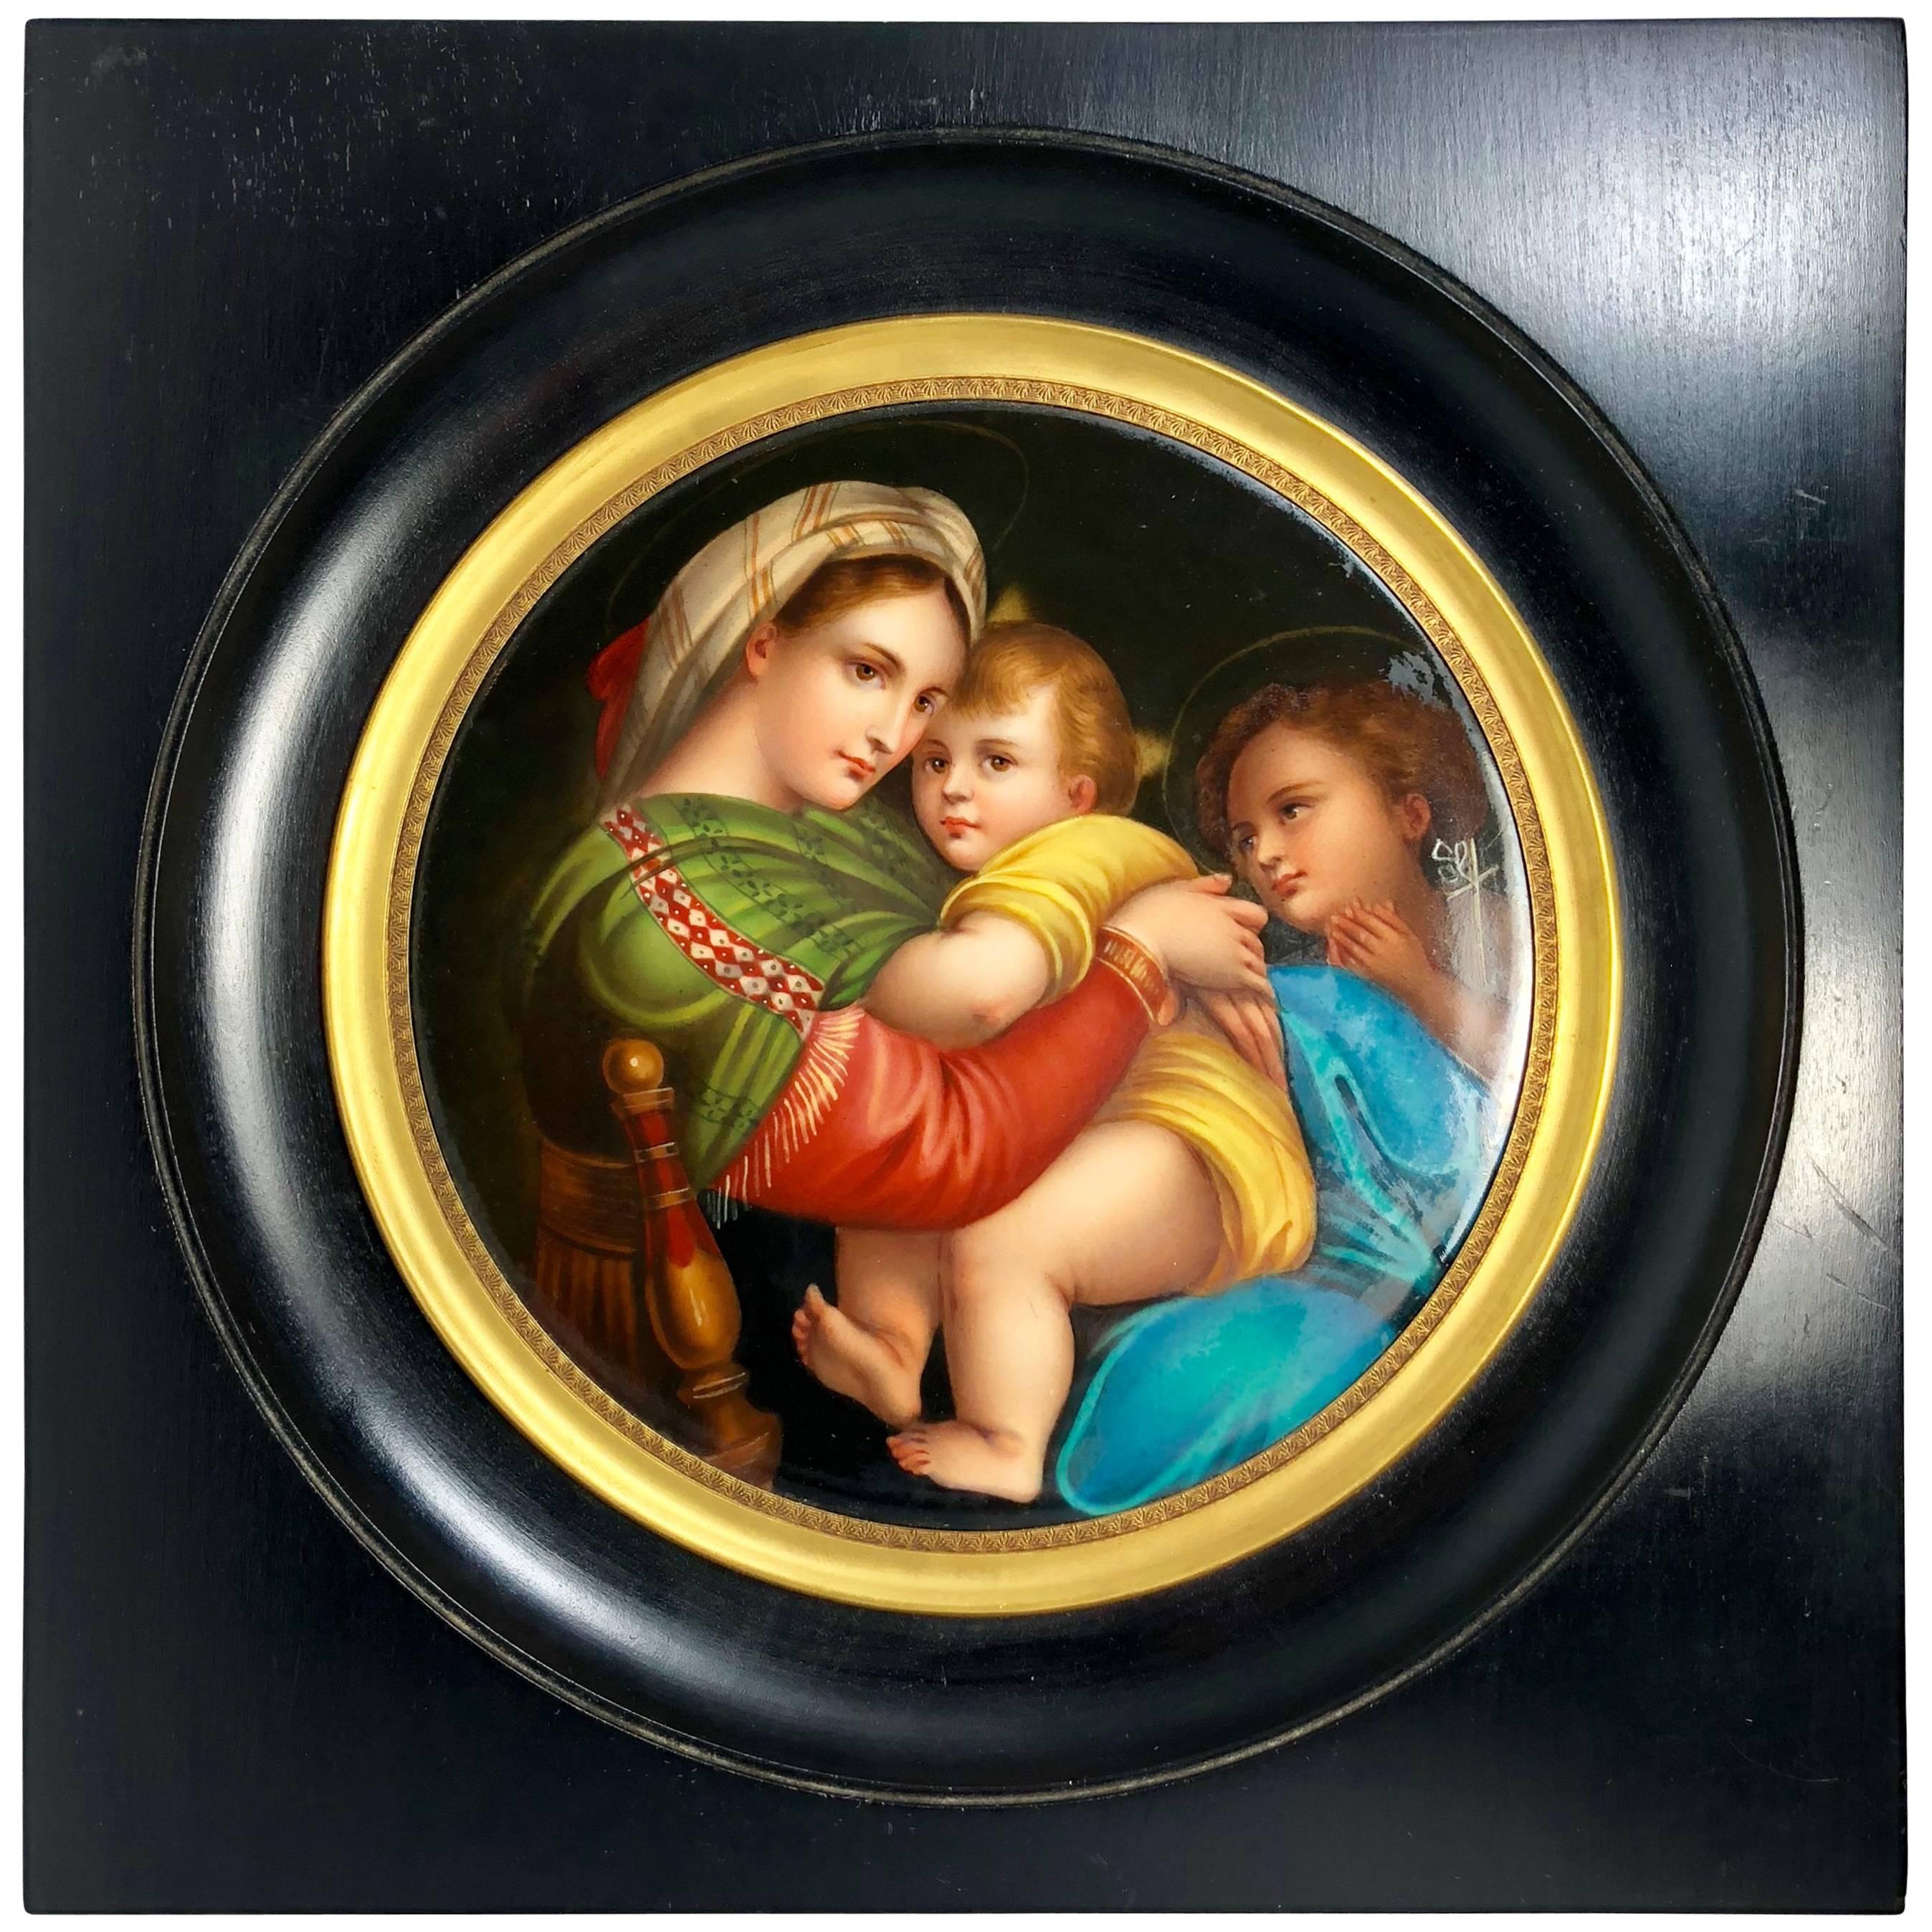 Antique Italian Hand-Painted Porcelain of Madonna and Child, circa 1900